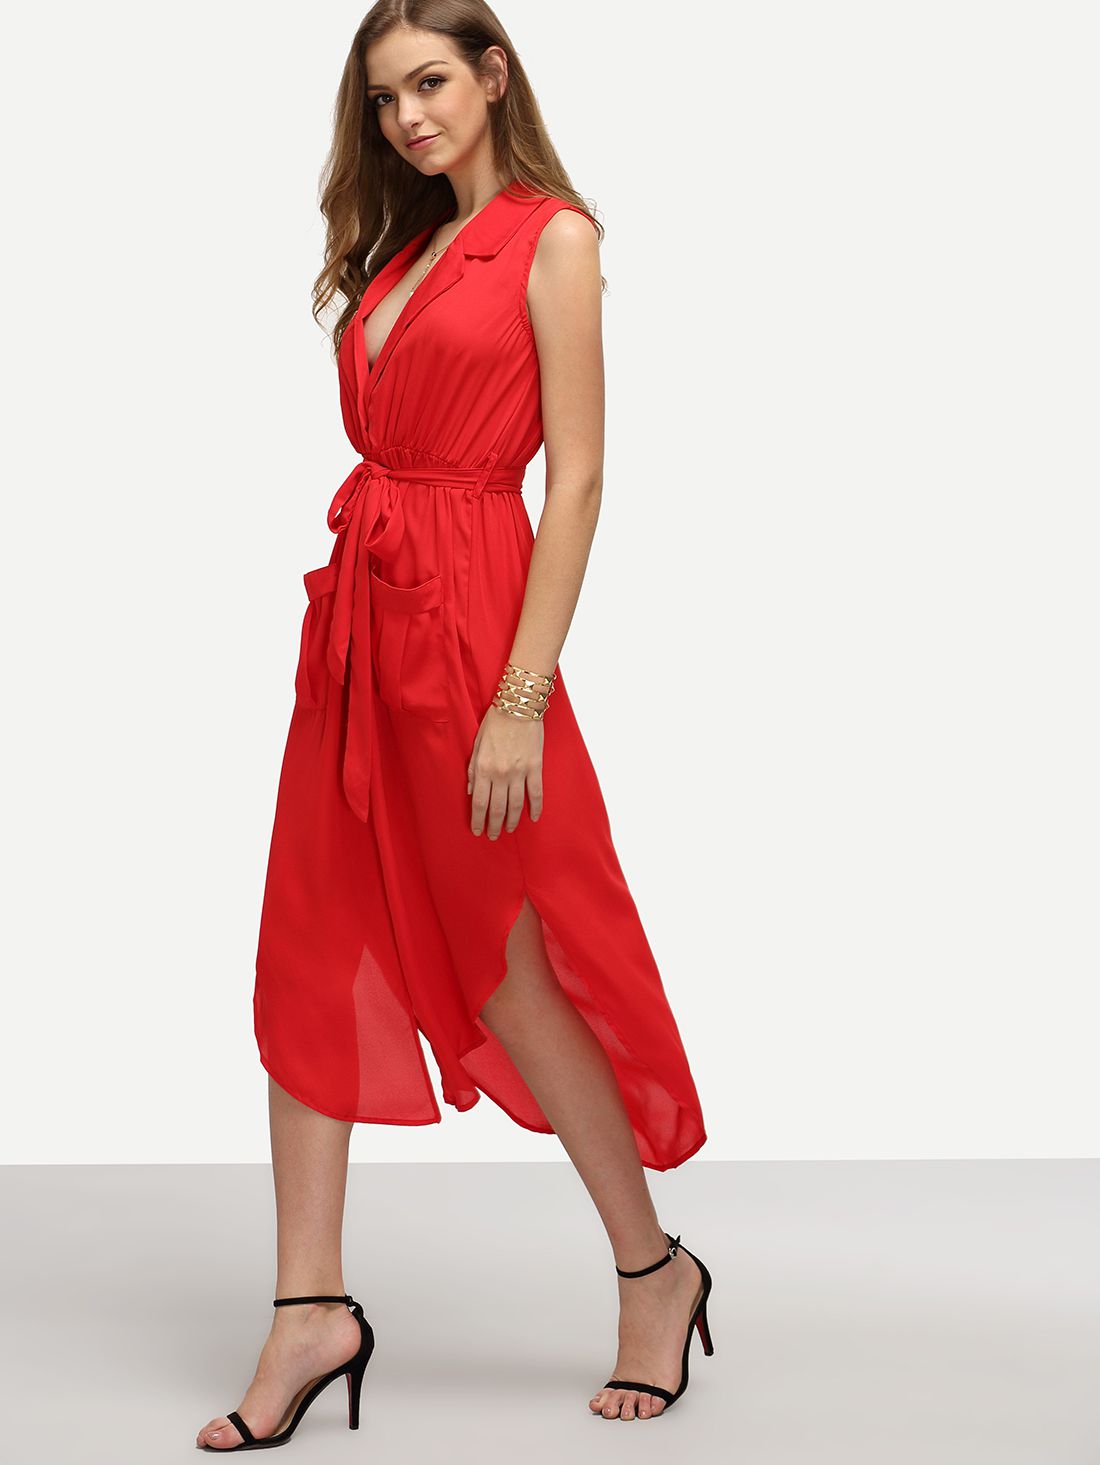 Red Lapel Self-tie High Low Chiffon Dress With Pockets